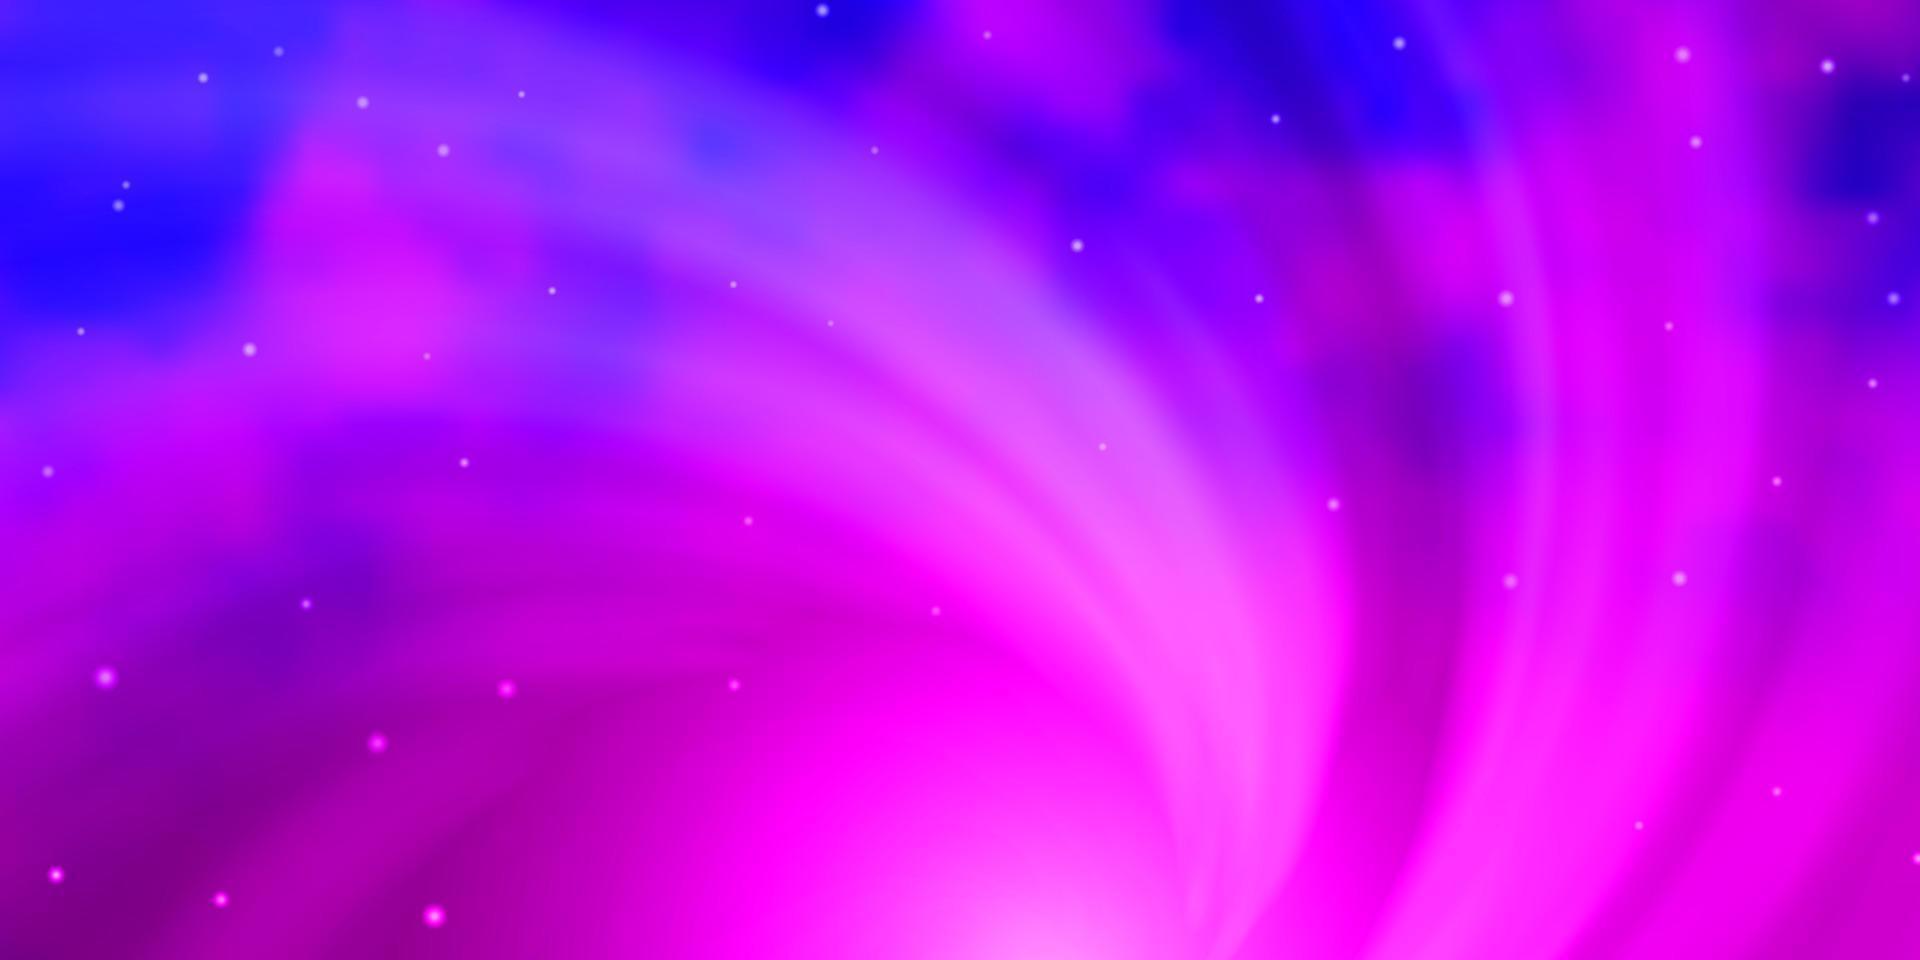 Light Purple, Pink vector pattern with abstract stars.